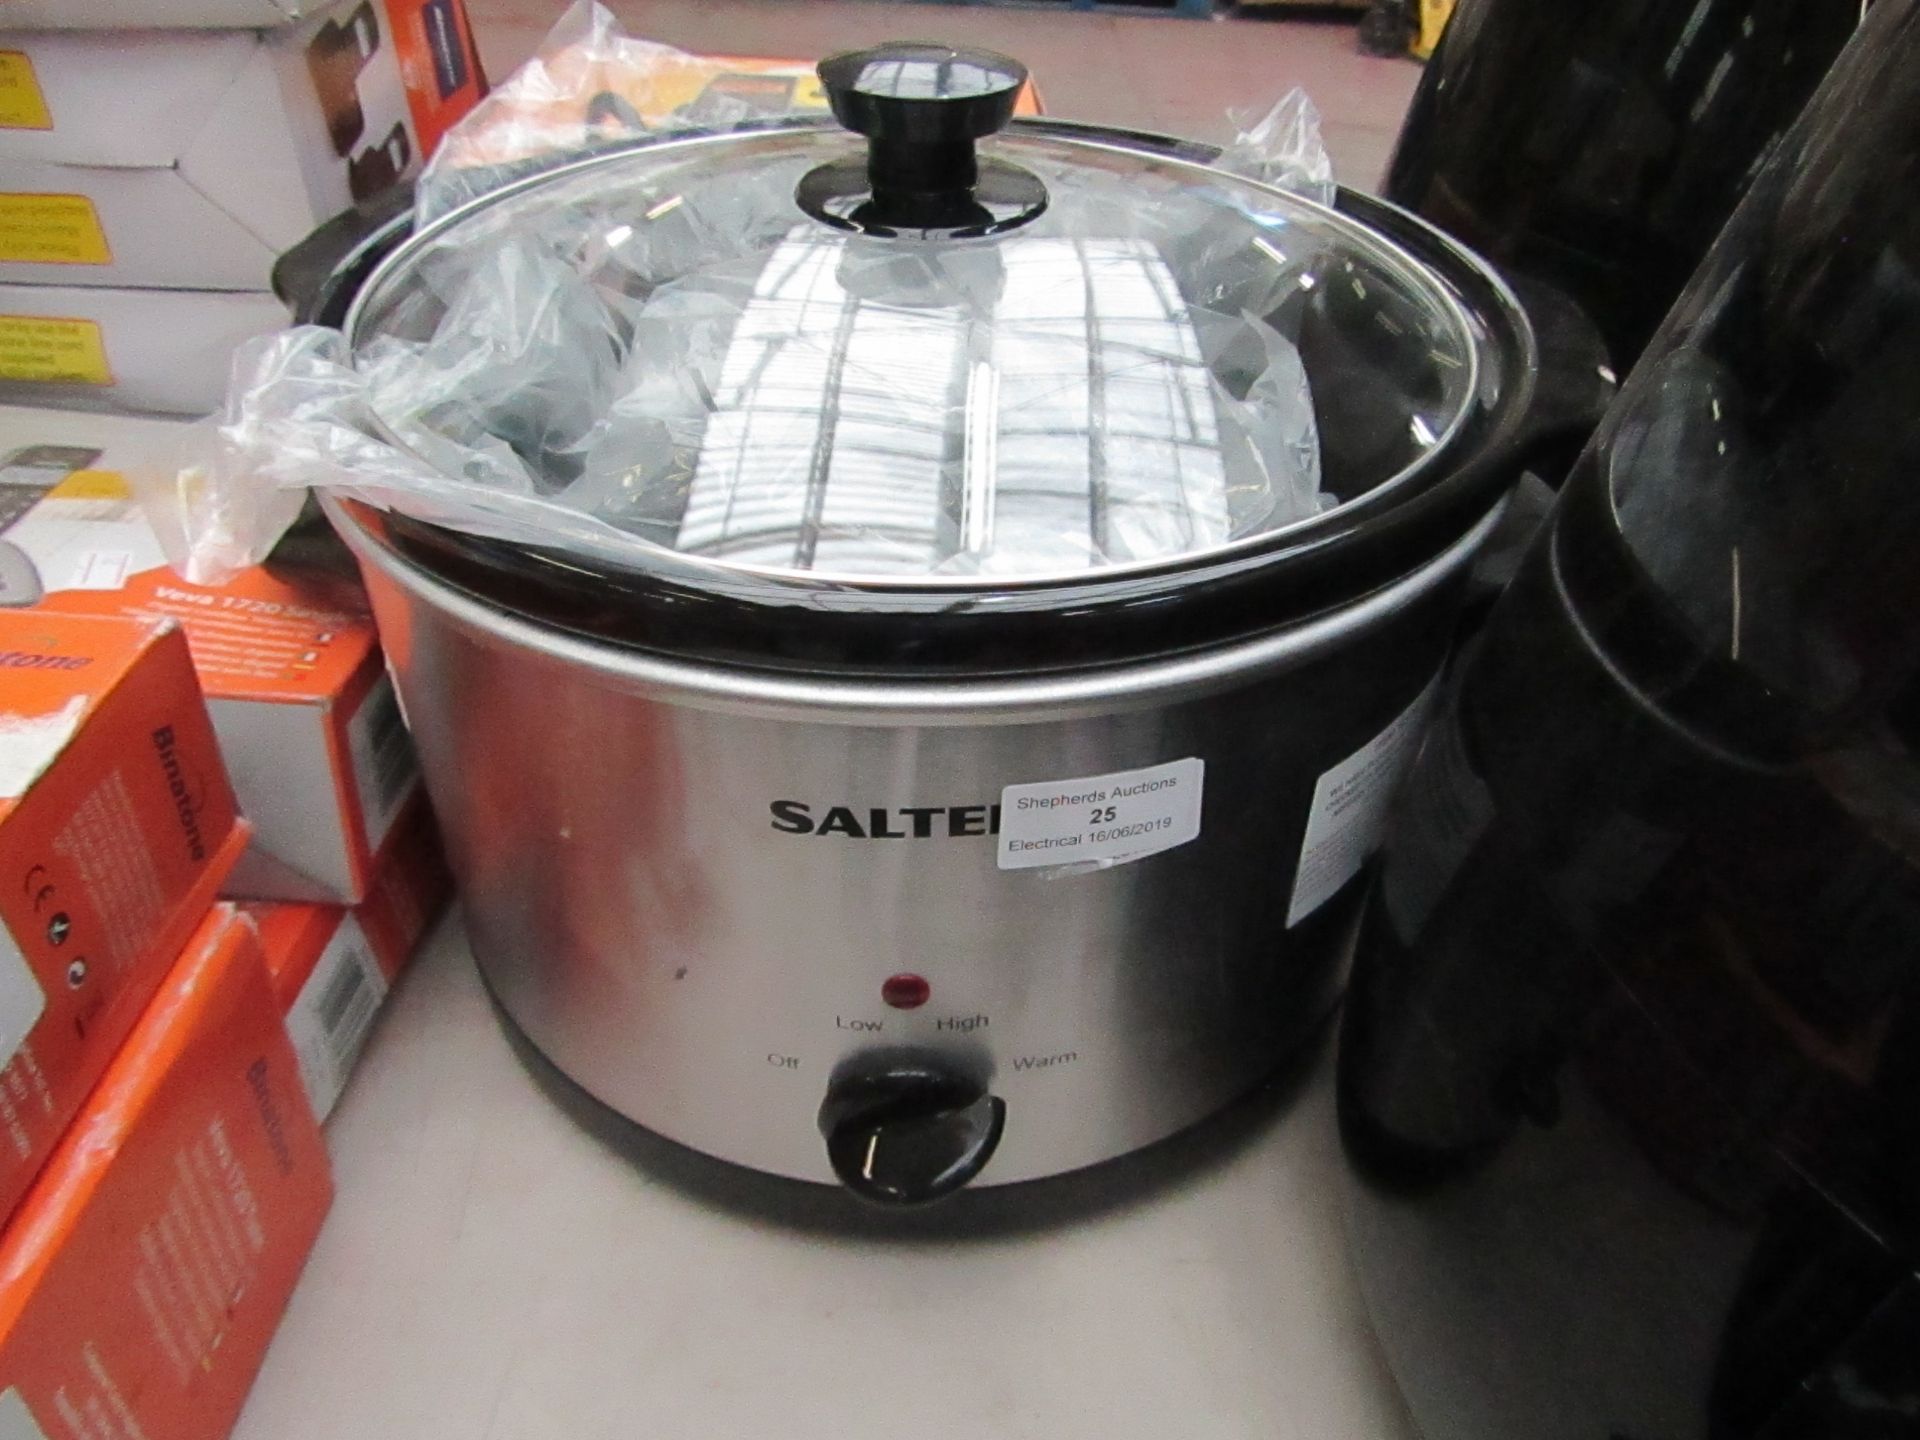 Salter slow cooker with lid, tested working.